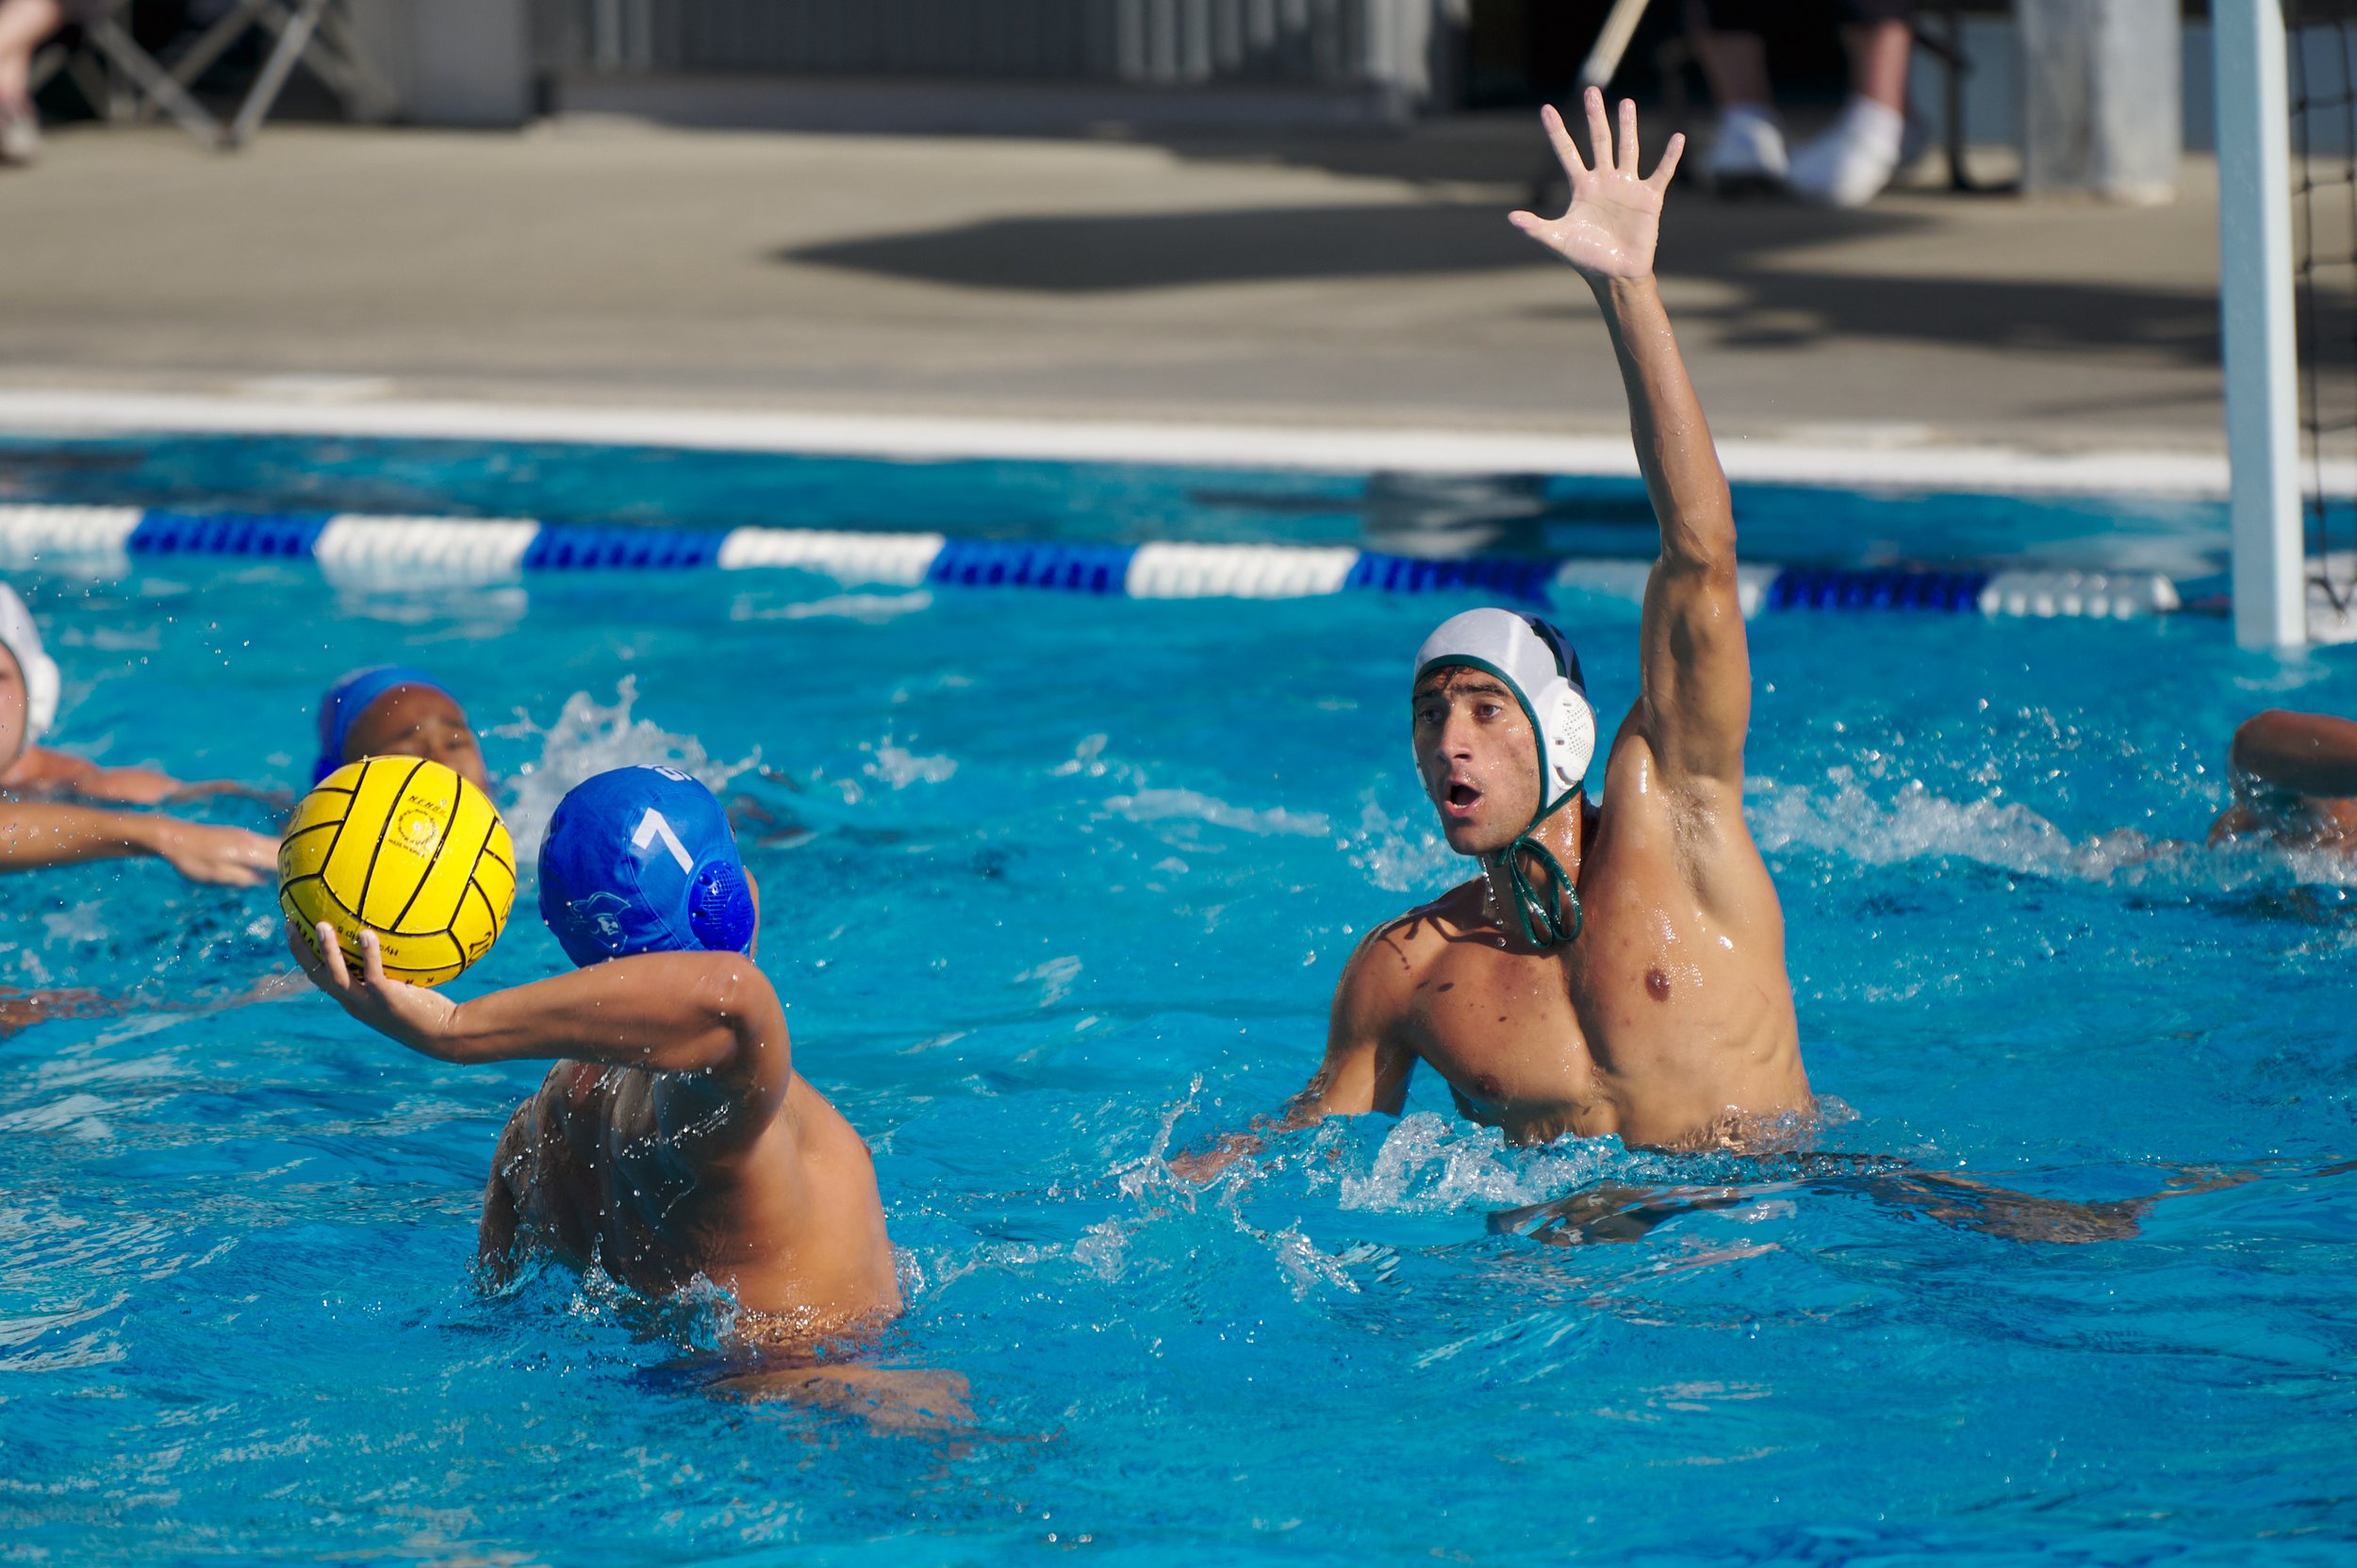  Santa Monica College Corsairs' Kristian Miranda and Los Angeles Valley College Monarchs' Sahak Abrahamyan during the men's water polo match on Wednesday, Sept. 28, 2022, at the SMC Aquatics Center in Santa Monica, Calif. The Corsairs lost 23-4. (Nic